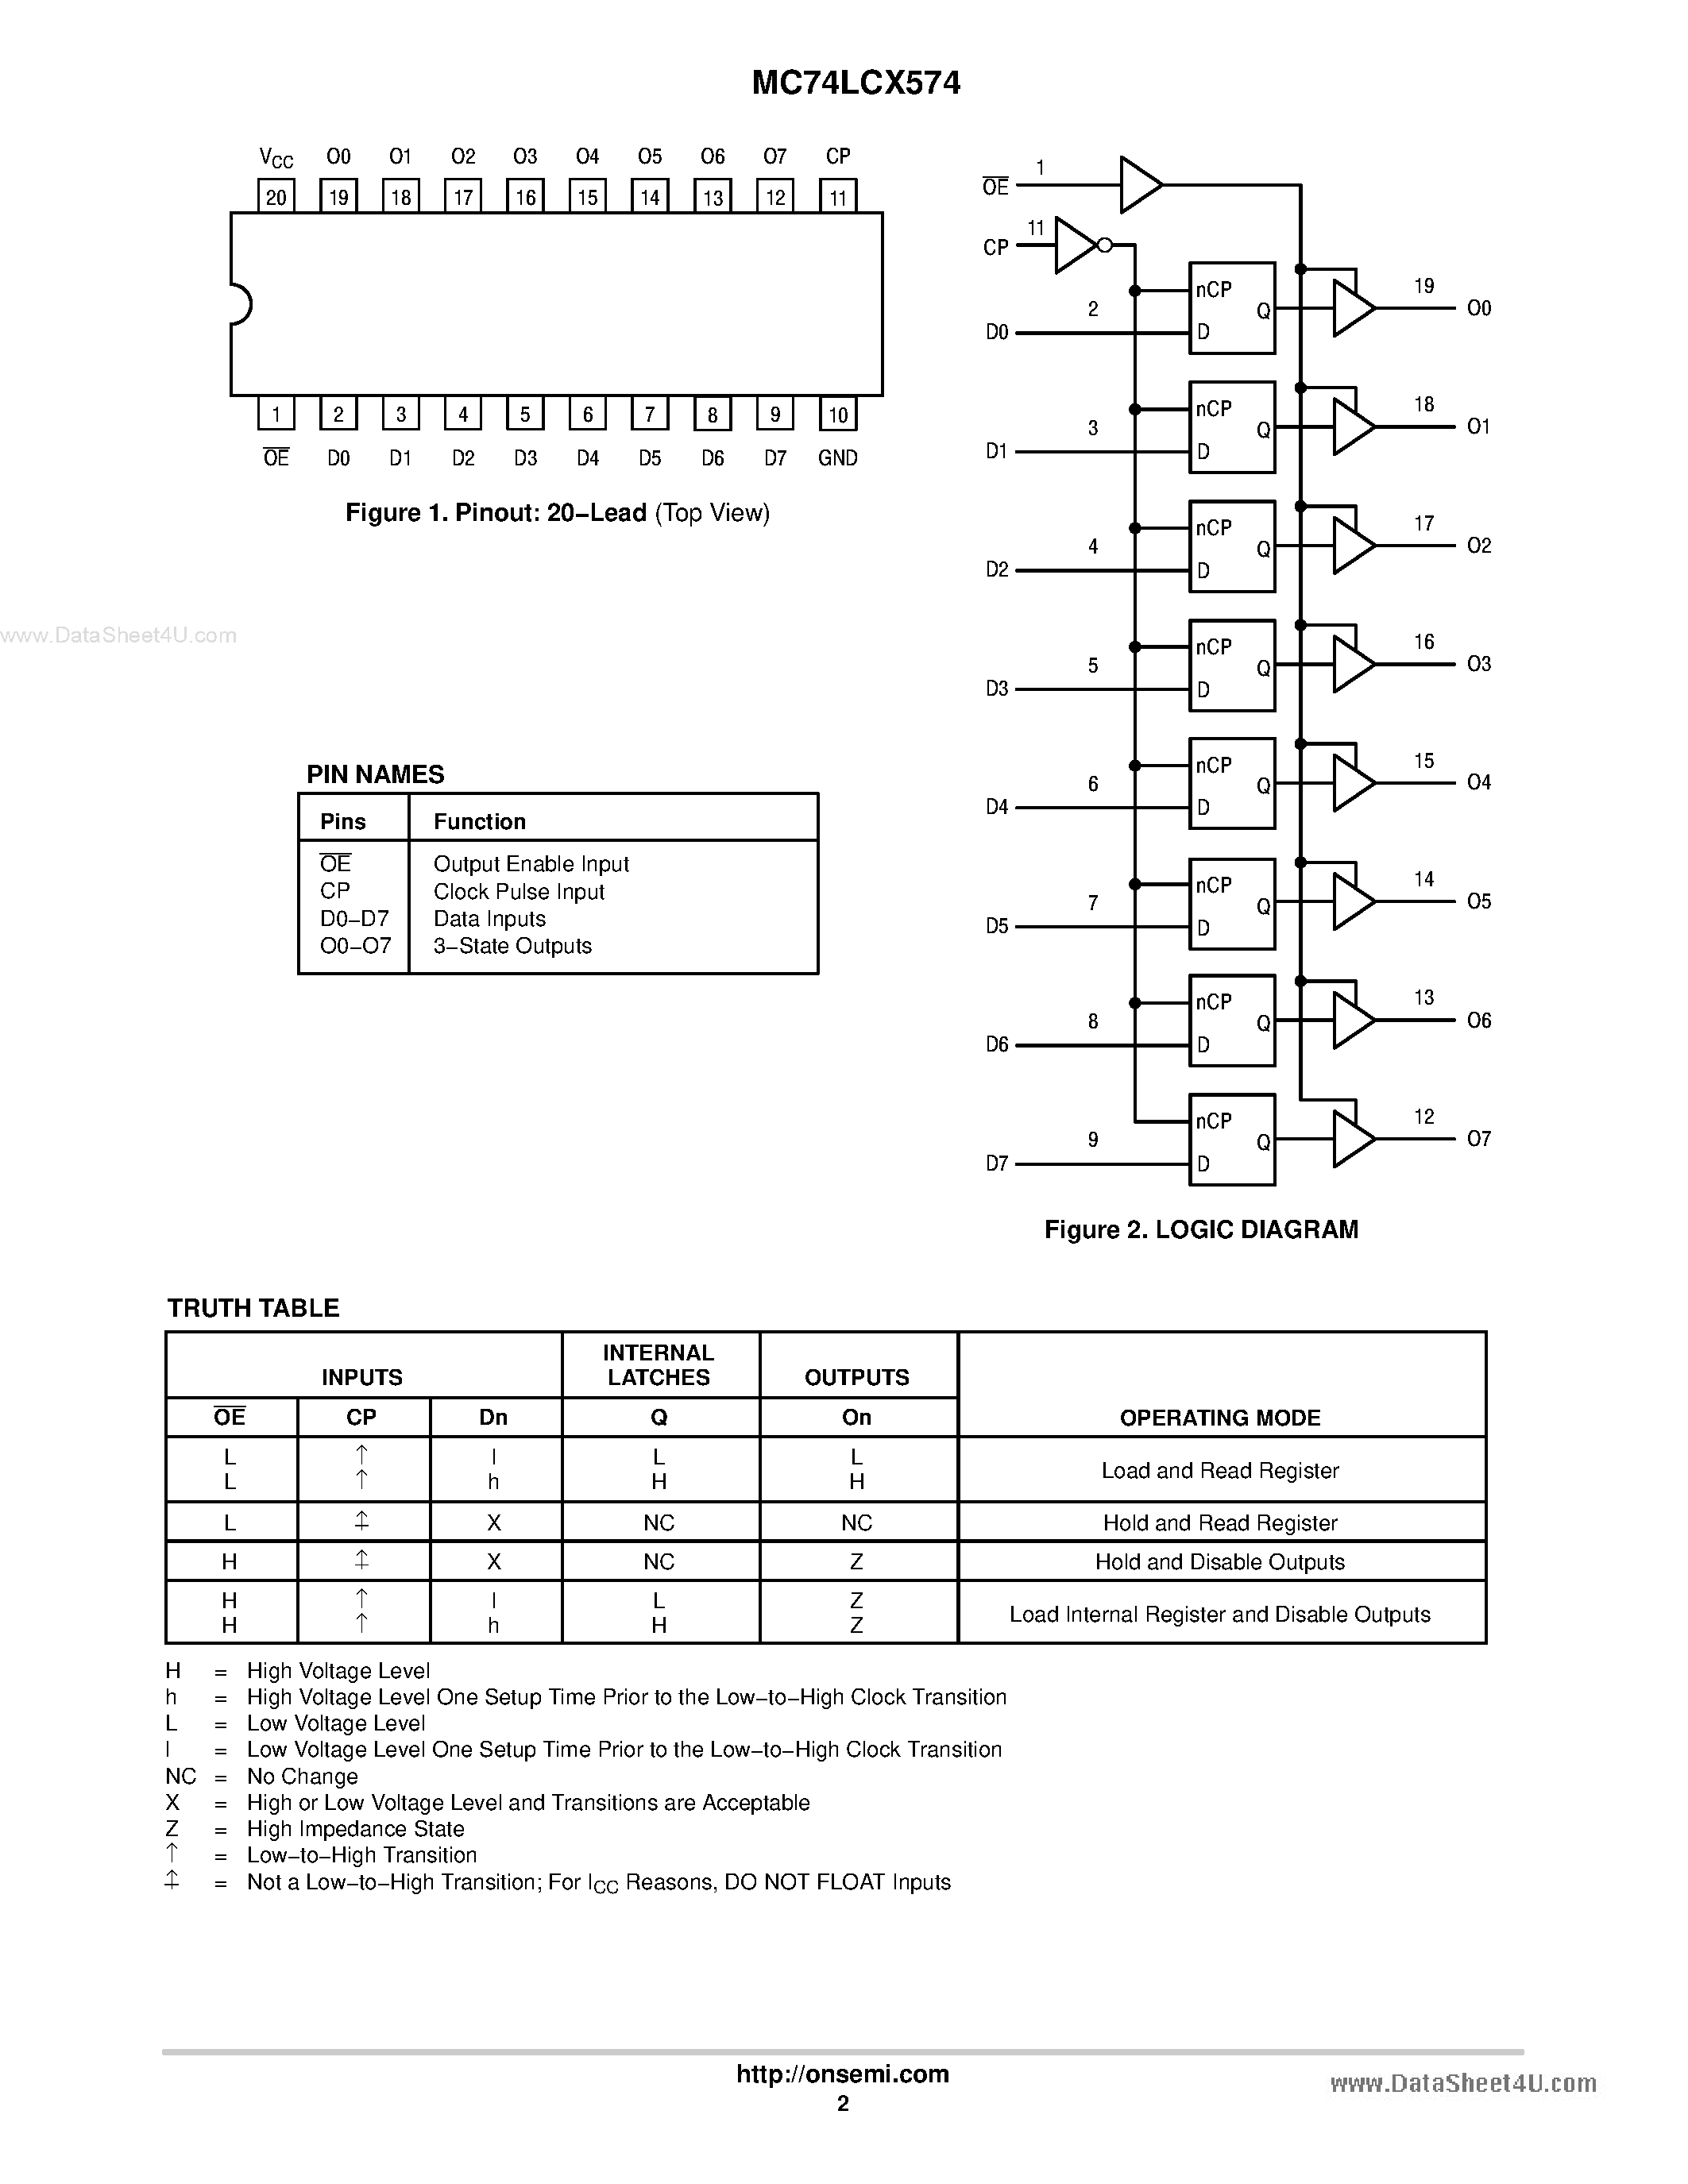 Datasheet LCX574DT - Search -----> MC74LCX574 page 2